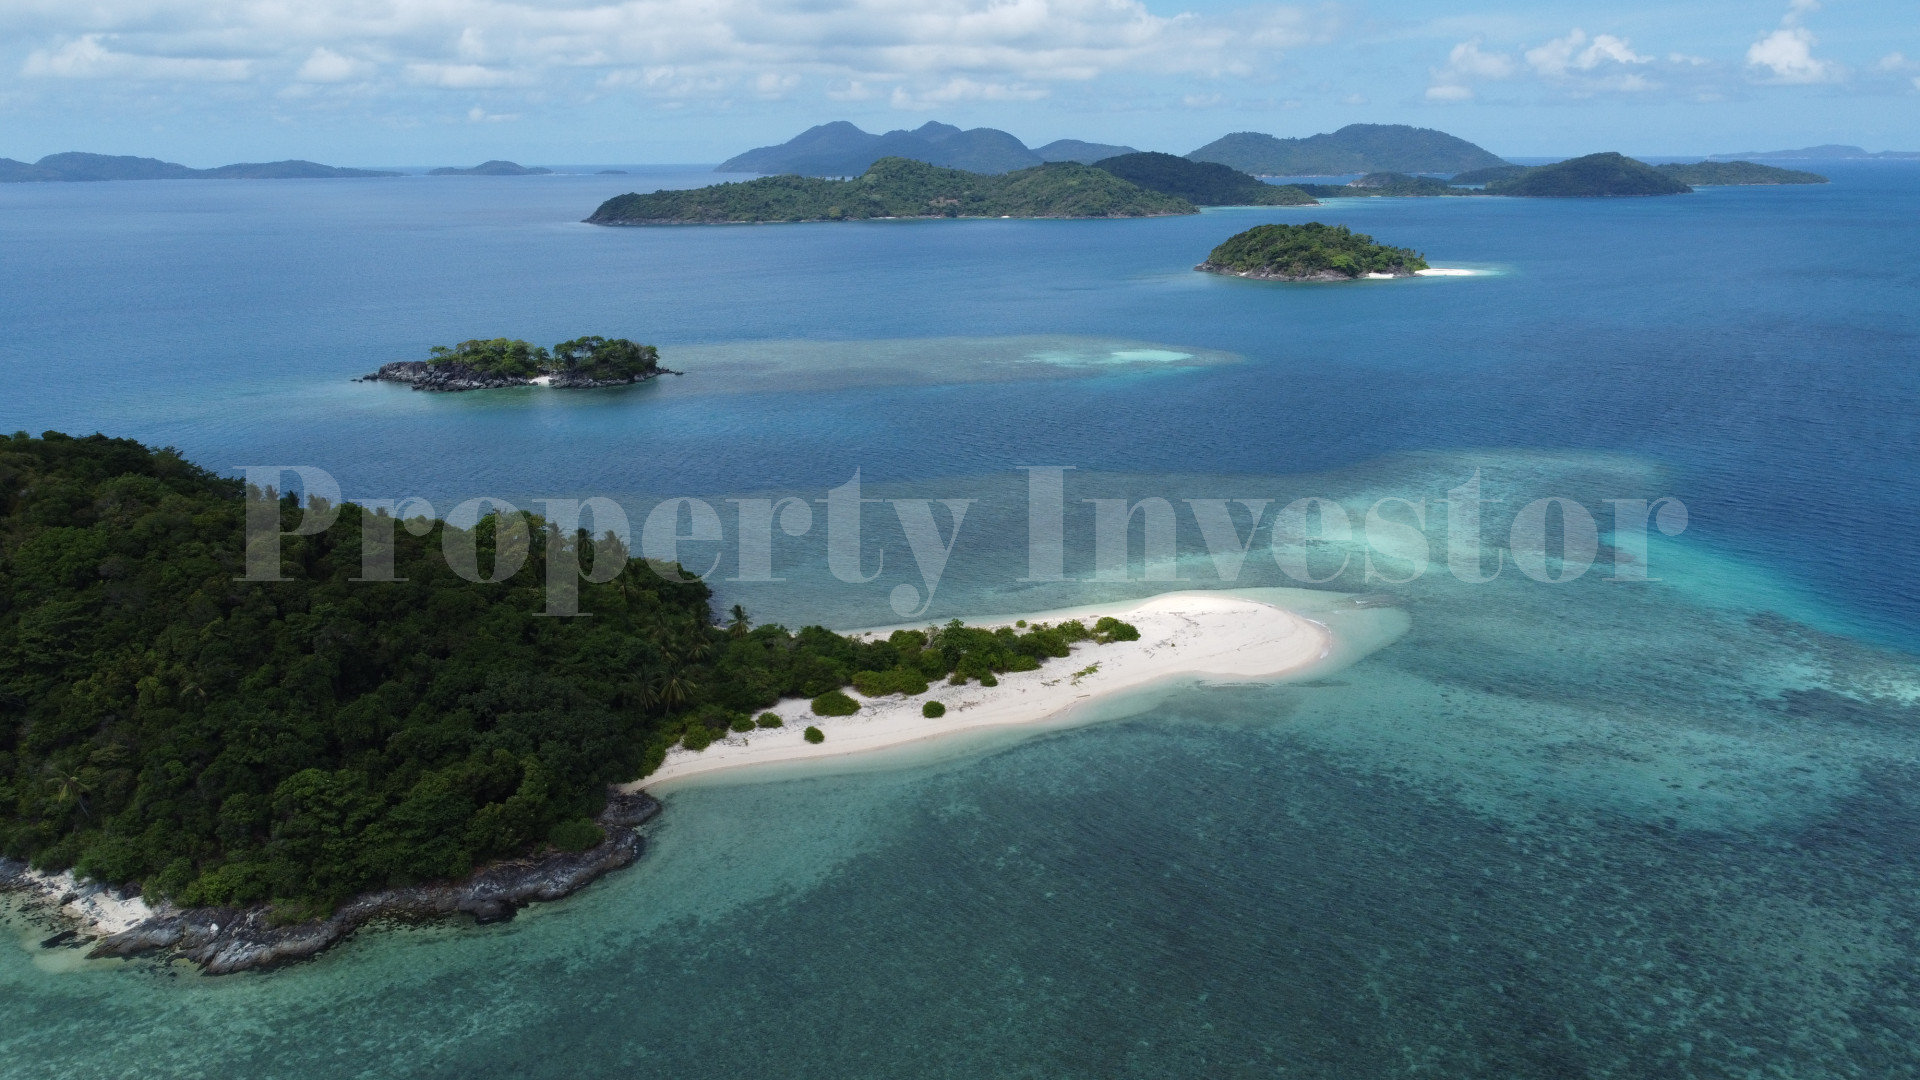 Untouched 7 Hectare Virgin Island for Commercial Development for Sale in the Riau Islands, Indonesia